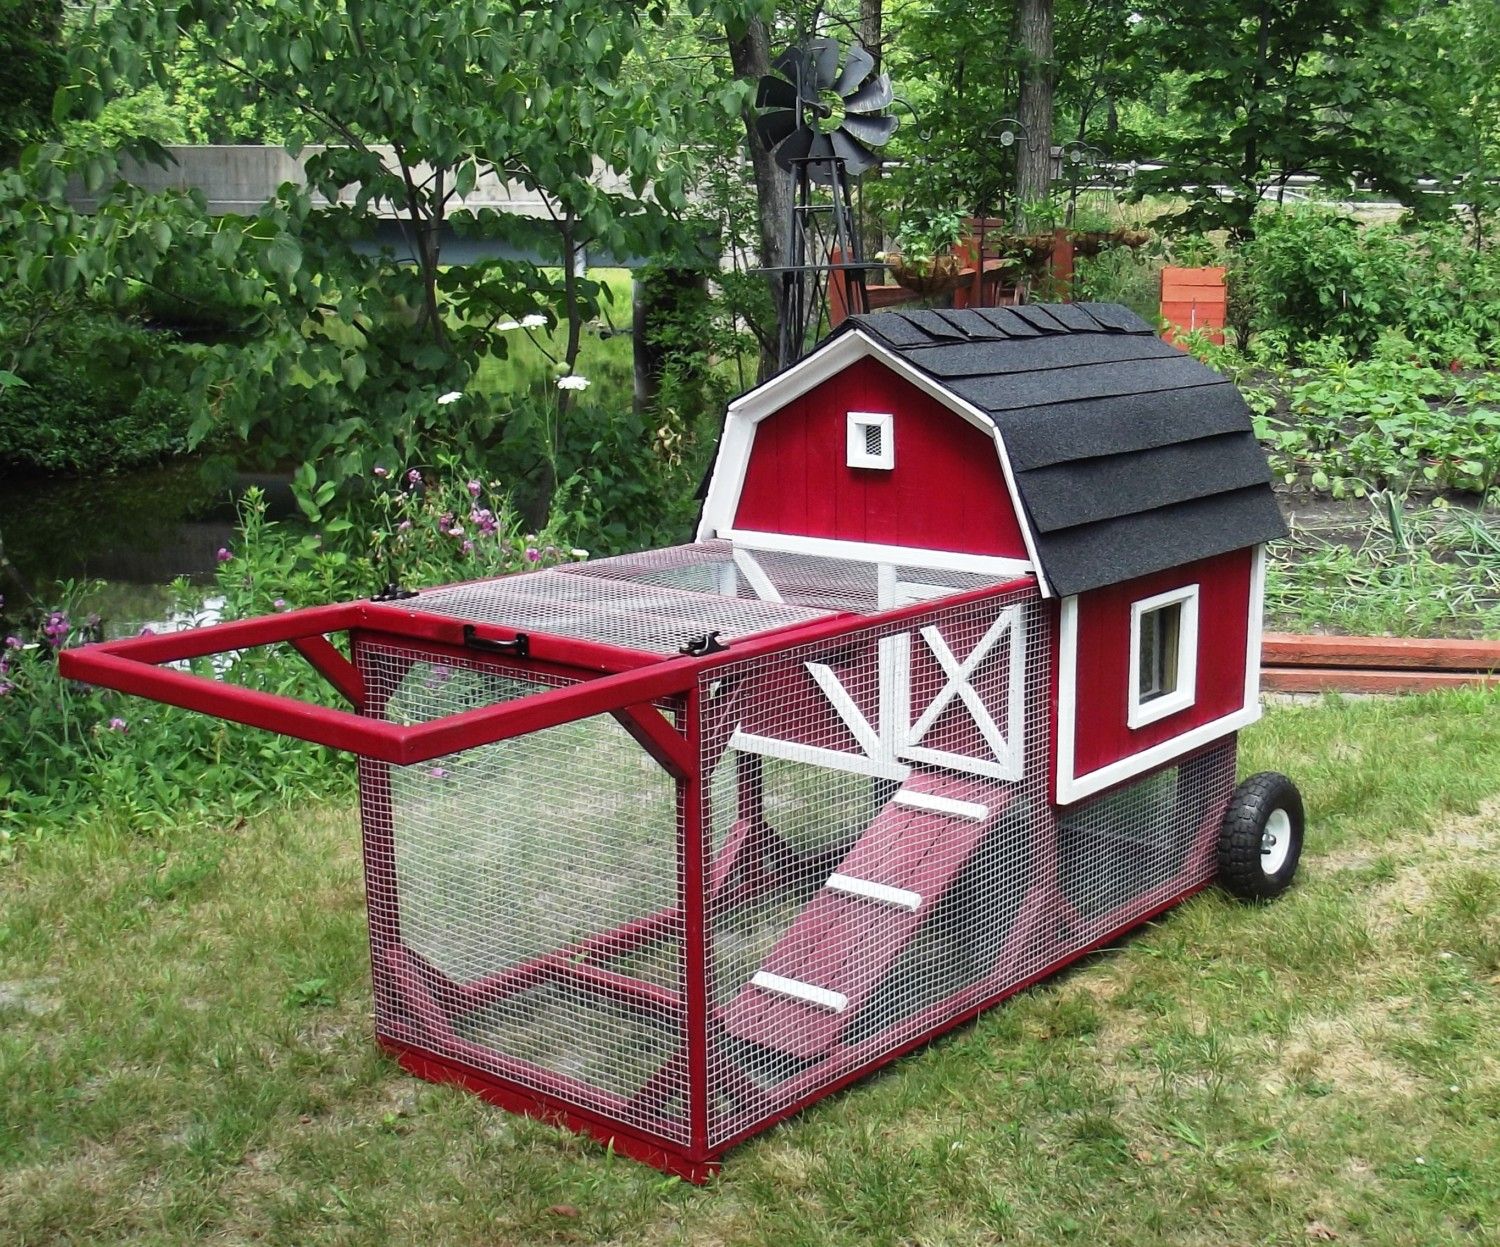 The Little Red Barn Chicken Tractor By Bkeee - BackYard ...